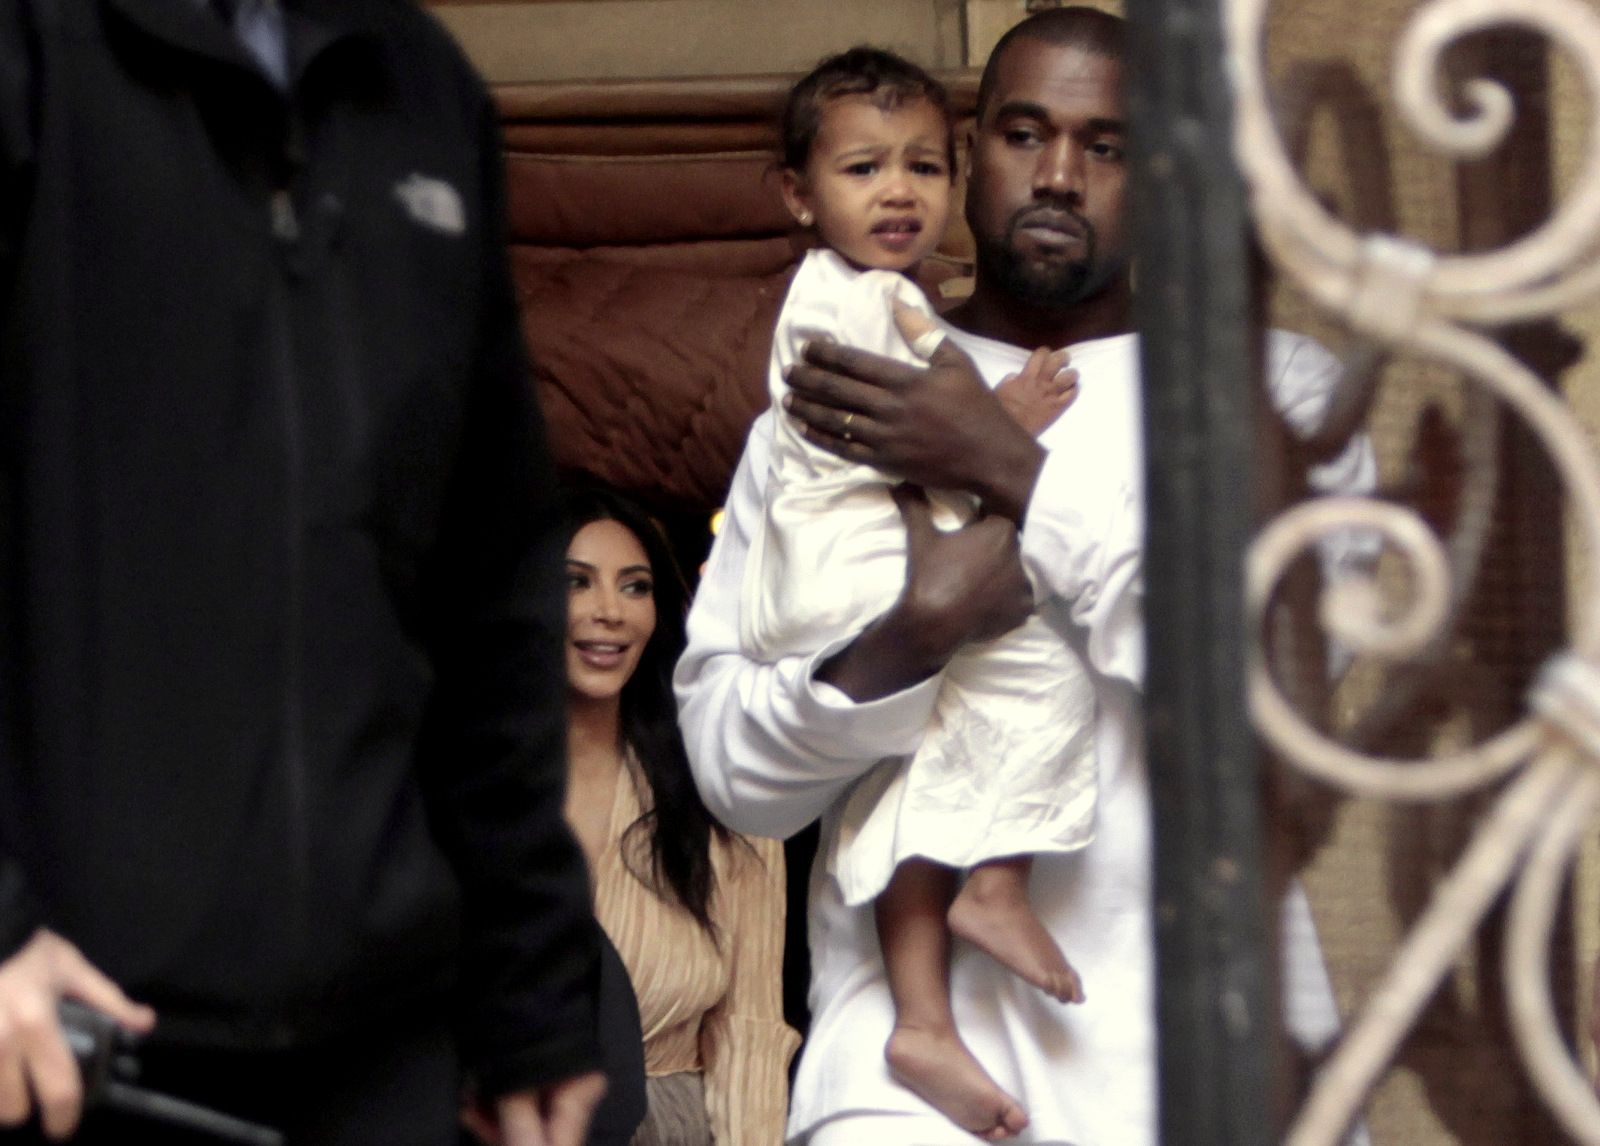 Kim Kardashian, a US reality TV star, and her husband Kanye West holding their daughter North West, walk inside Armenian St. James Cathedral, in Jerusalem, Monday, April 13, 2015. (AP Photo/Mahmoud Illean)